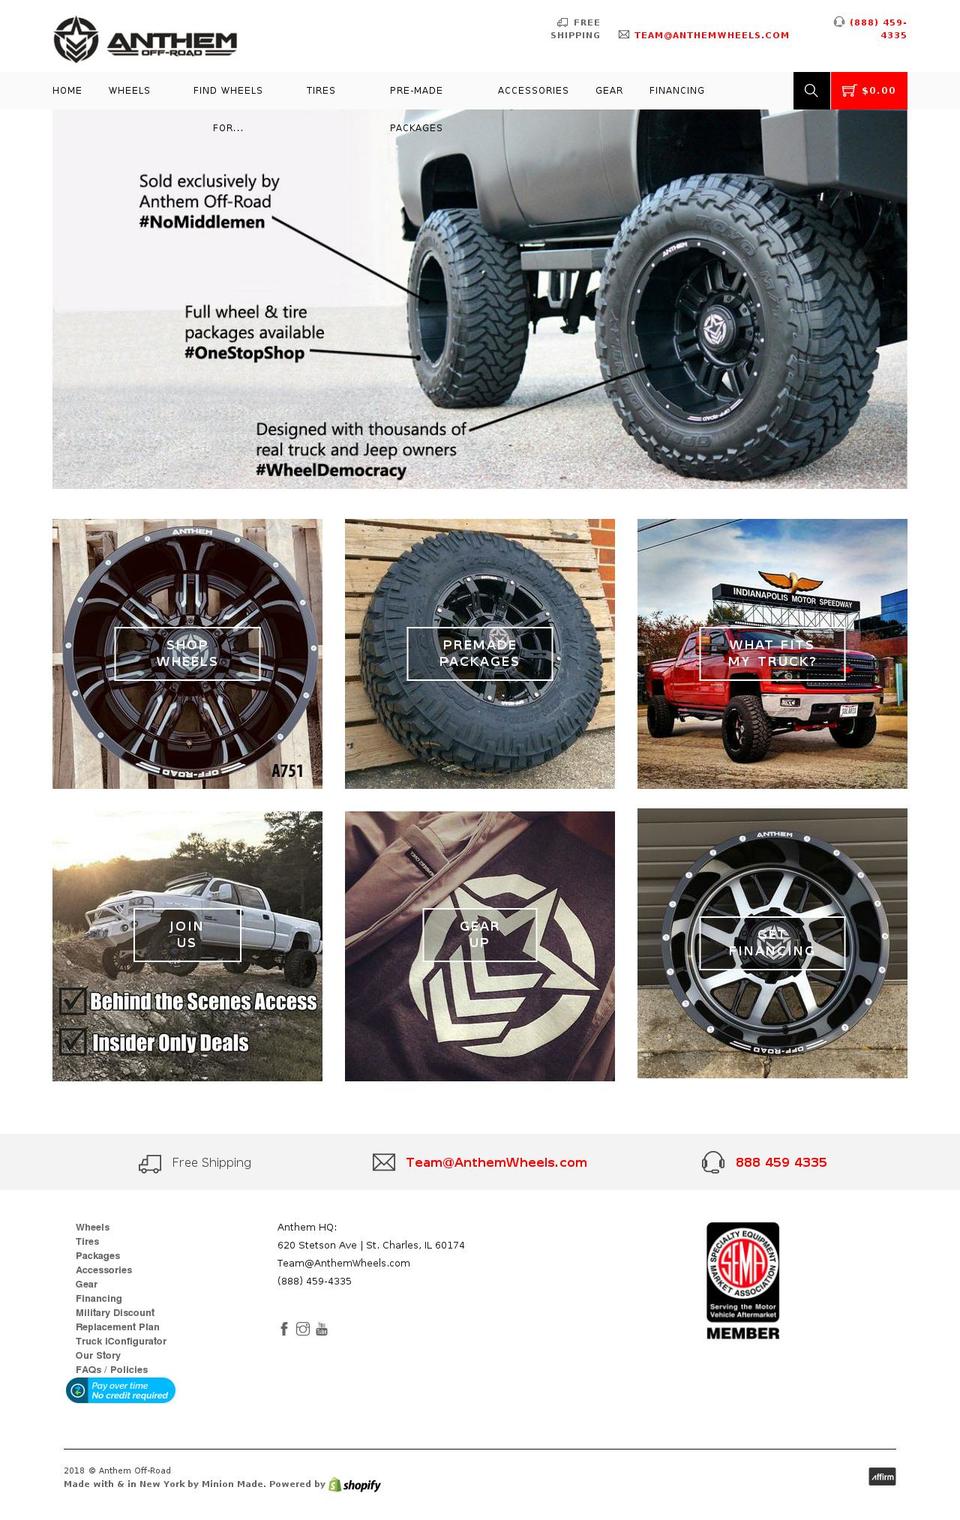 Made With ❤ By Minion Made Shopify theme site example shop.anthemwheels.com